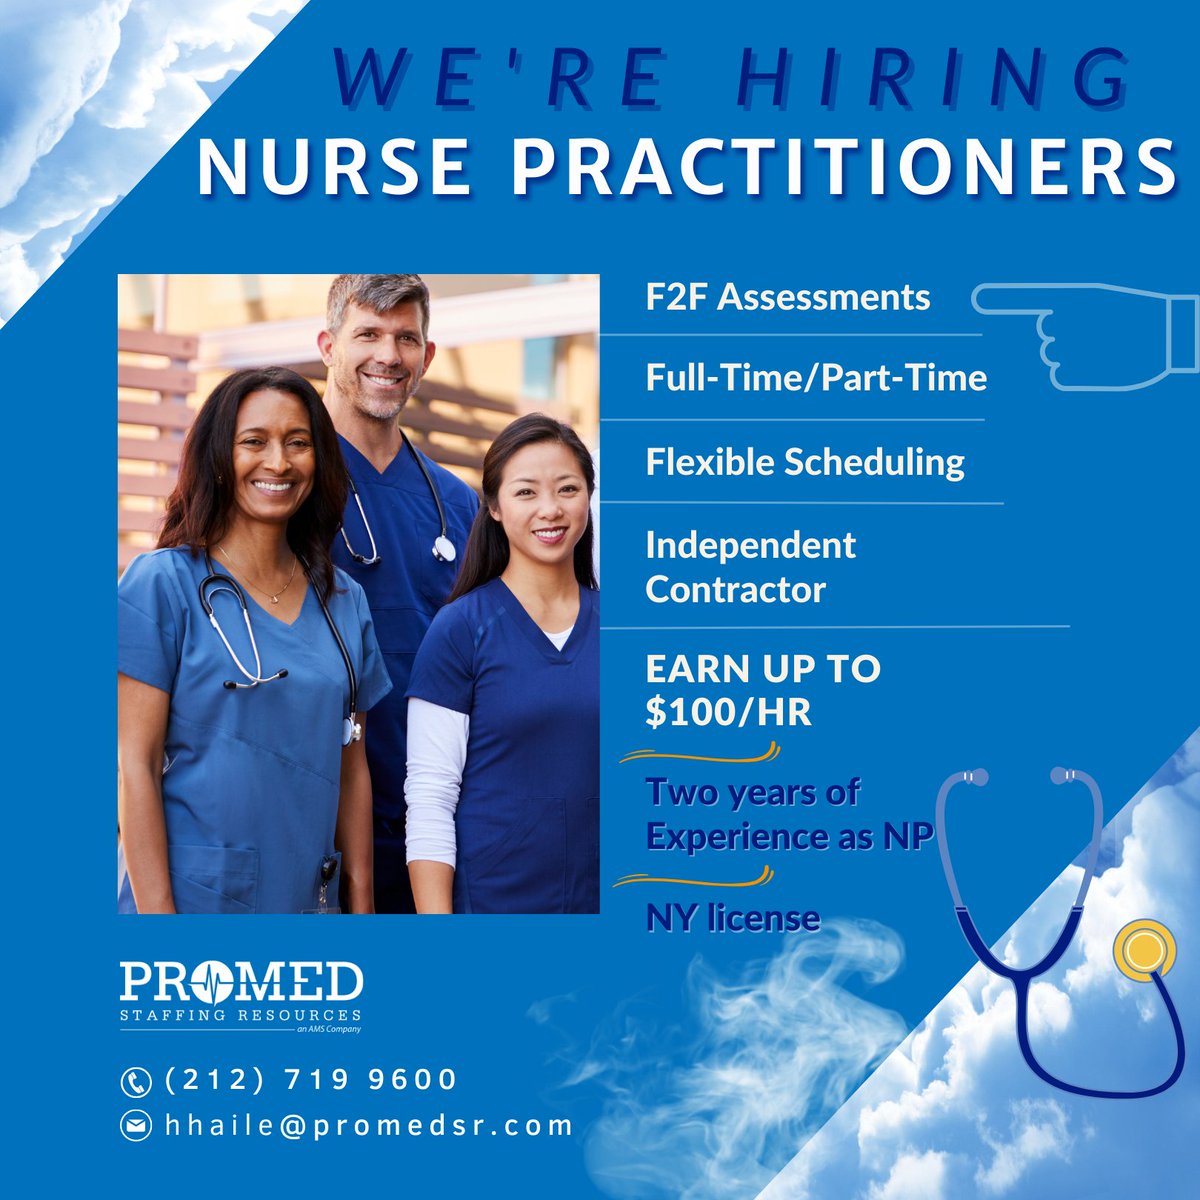 #hiring for #fulltime and #parttime 1099 positions! Apply today by sending your resume to hhaile@promedsr.com.
 
#nursepractitioner #maximus #promedsr #nursepractitionerjobs #nursepractitionersinyc #newyorknursepractitioners #practitionerorder #newyorkjobs